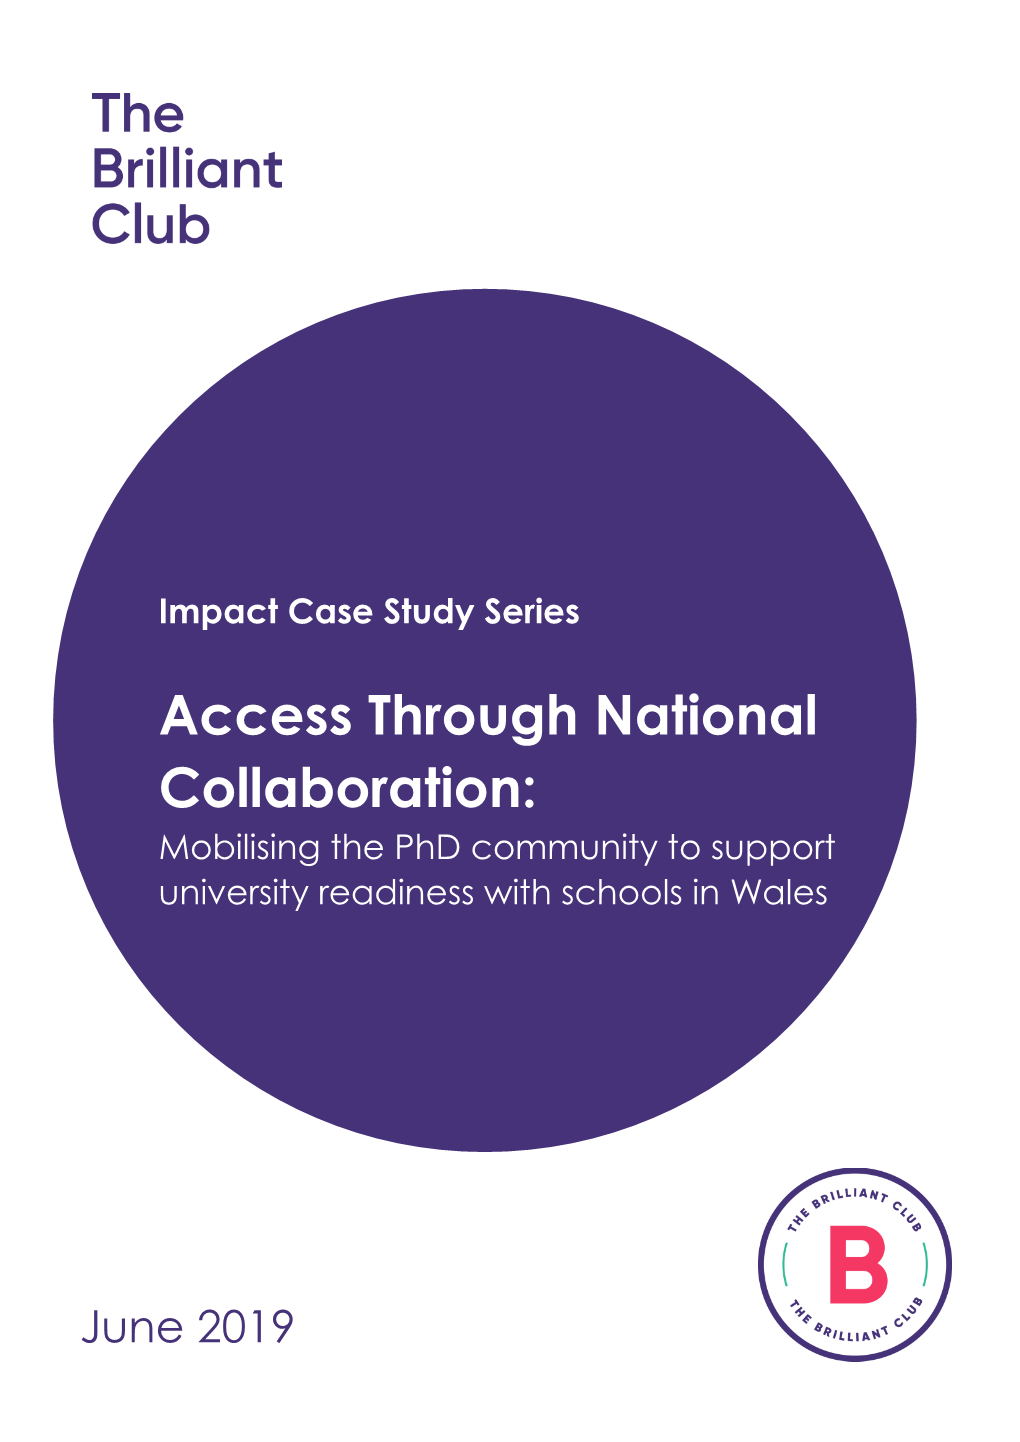 Access Through National Collaboration: Mobilising the Phd Community to Support University Readiness with Schools in Wales